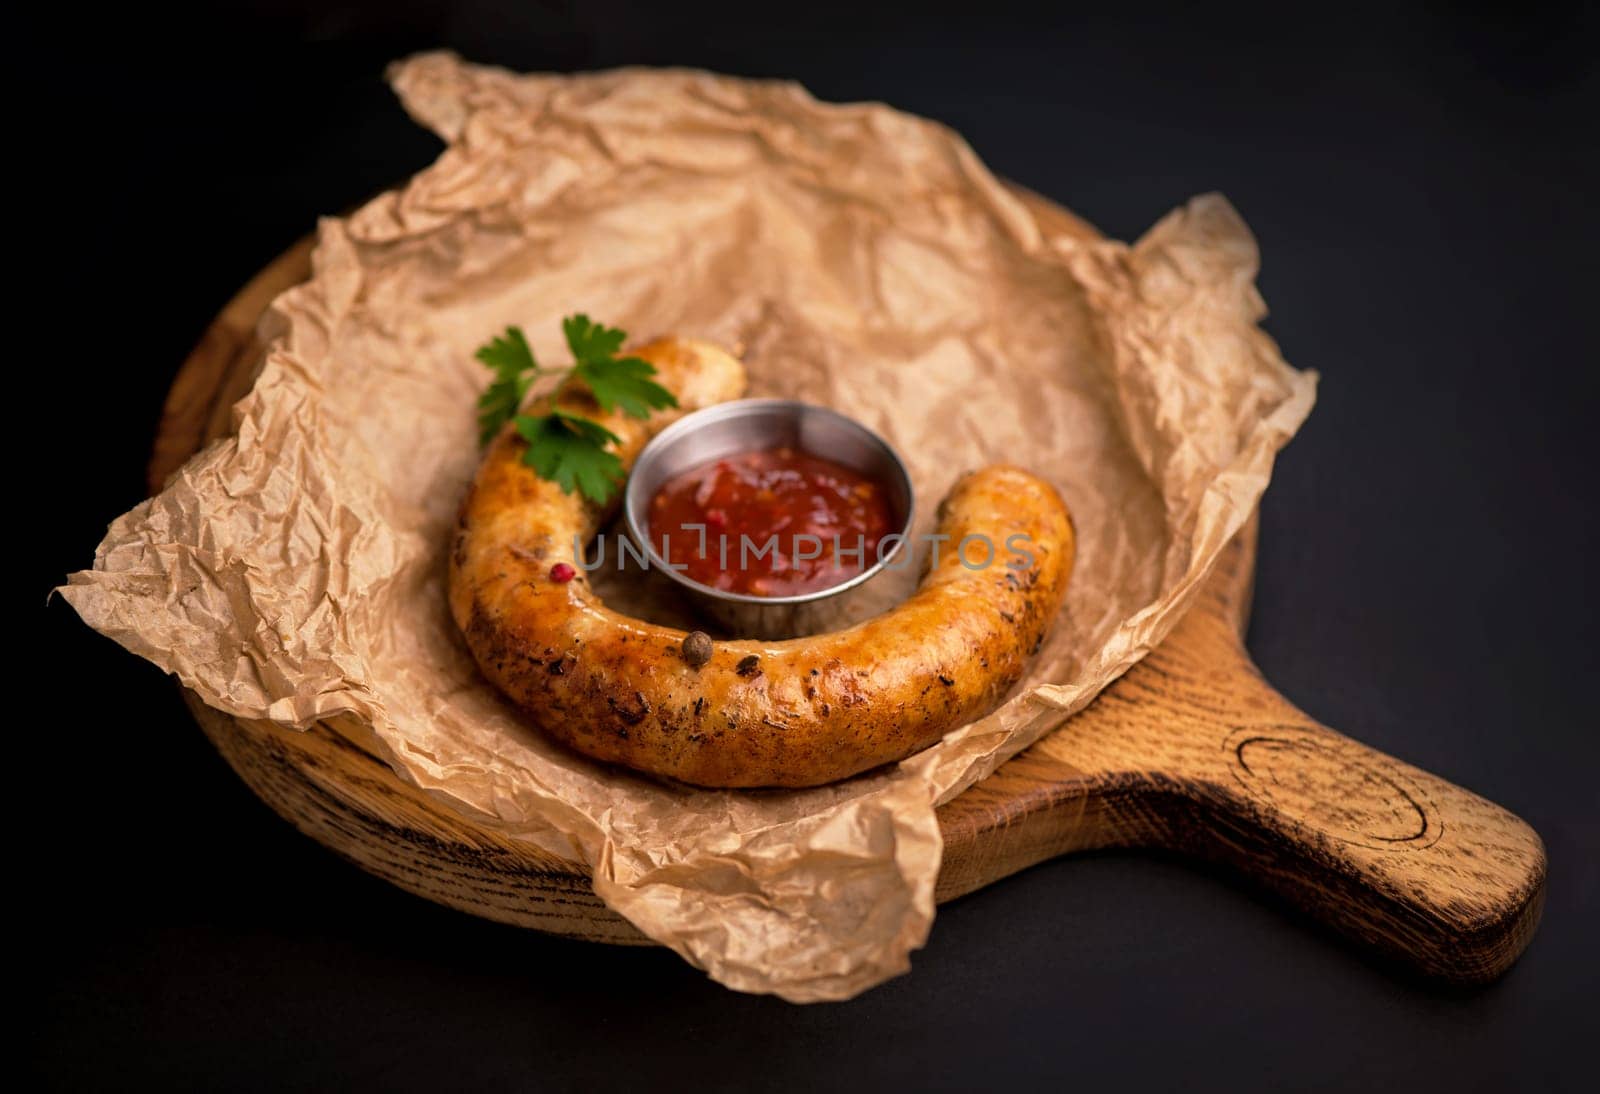 grilled sausages with sauce on a wooden board on a black background